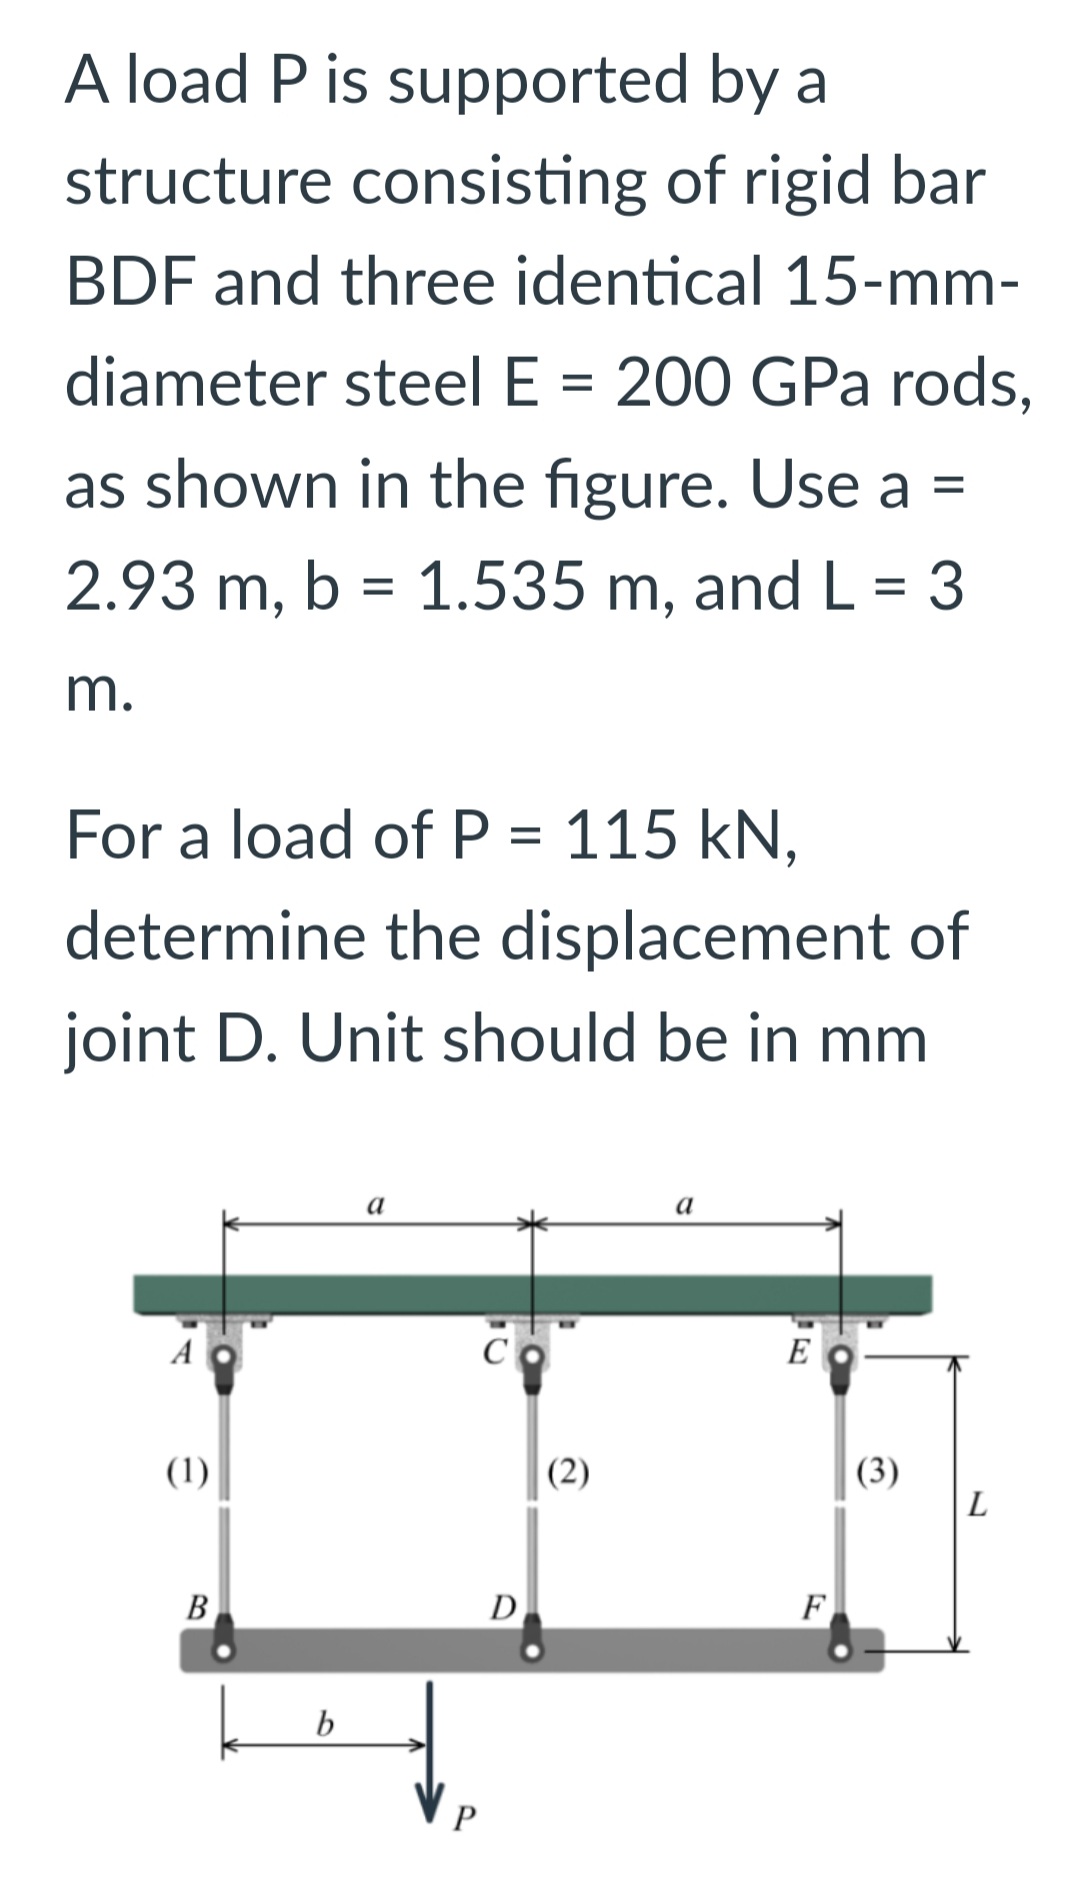 A load P is supported by a
structure consisting of rigid bar
BDF and three identical 15-mm-
diameter steel E = 200 GPa rods,
as shown in the figure. Use a =
2.93 m, b = 1.535 m, and L = 3
m.
For a load of P = 115 kN,
determine the displacement of
joint D. Unit should be in mm
A
(1)
B
b
a
C
P
D
(2)
a
E
F
(3)
L